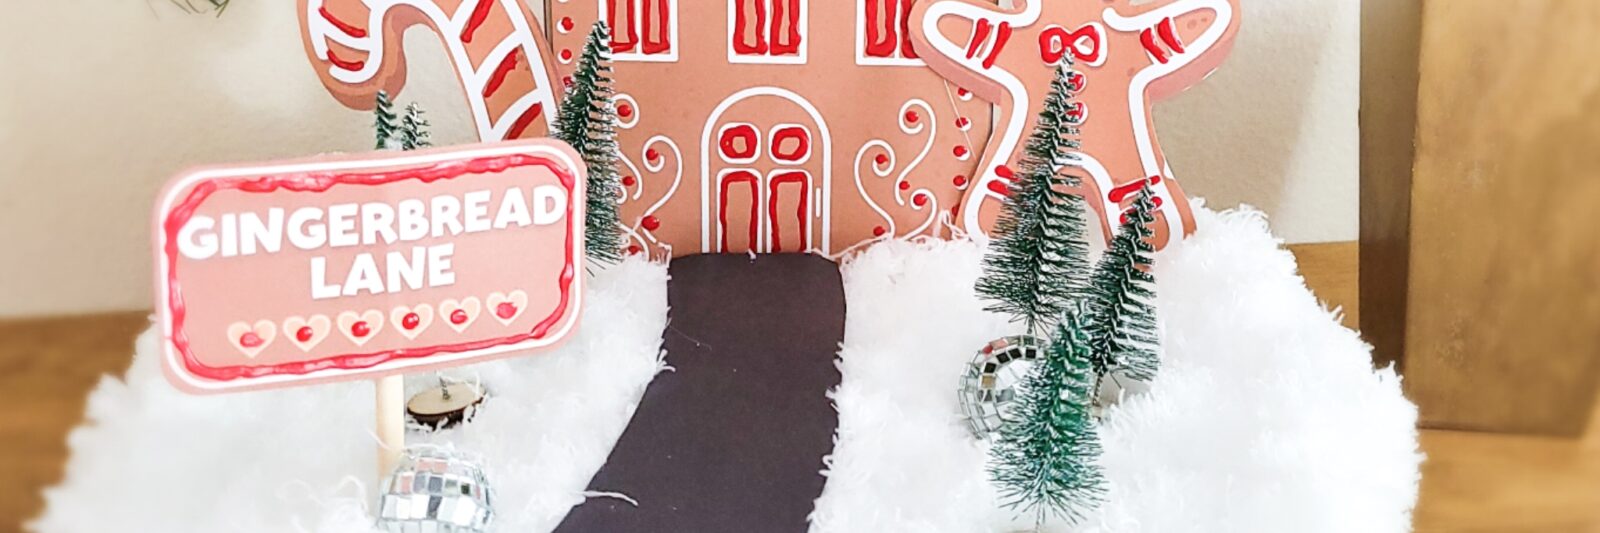 Dollar Tree Wooden House Gingerbread House